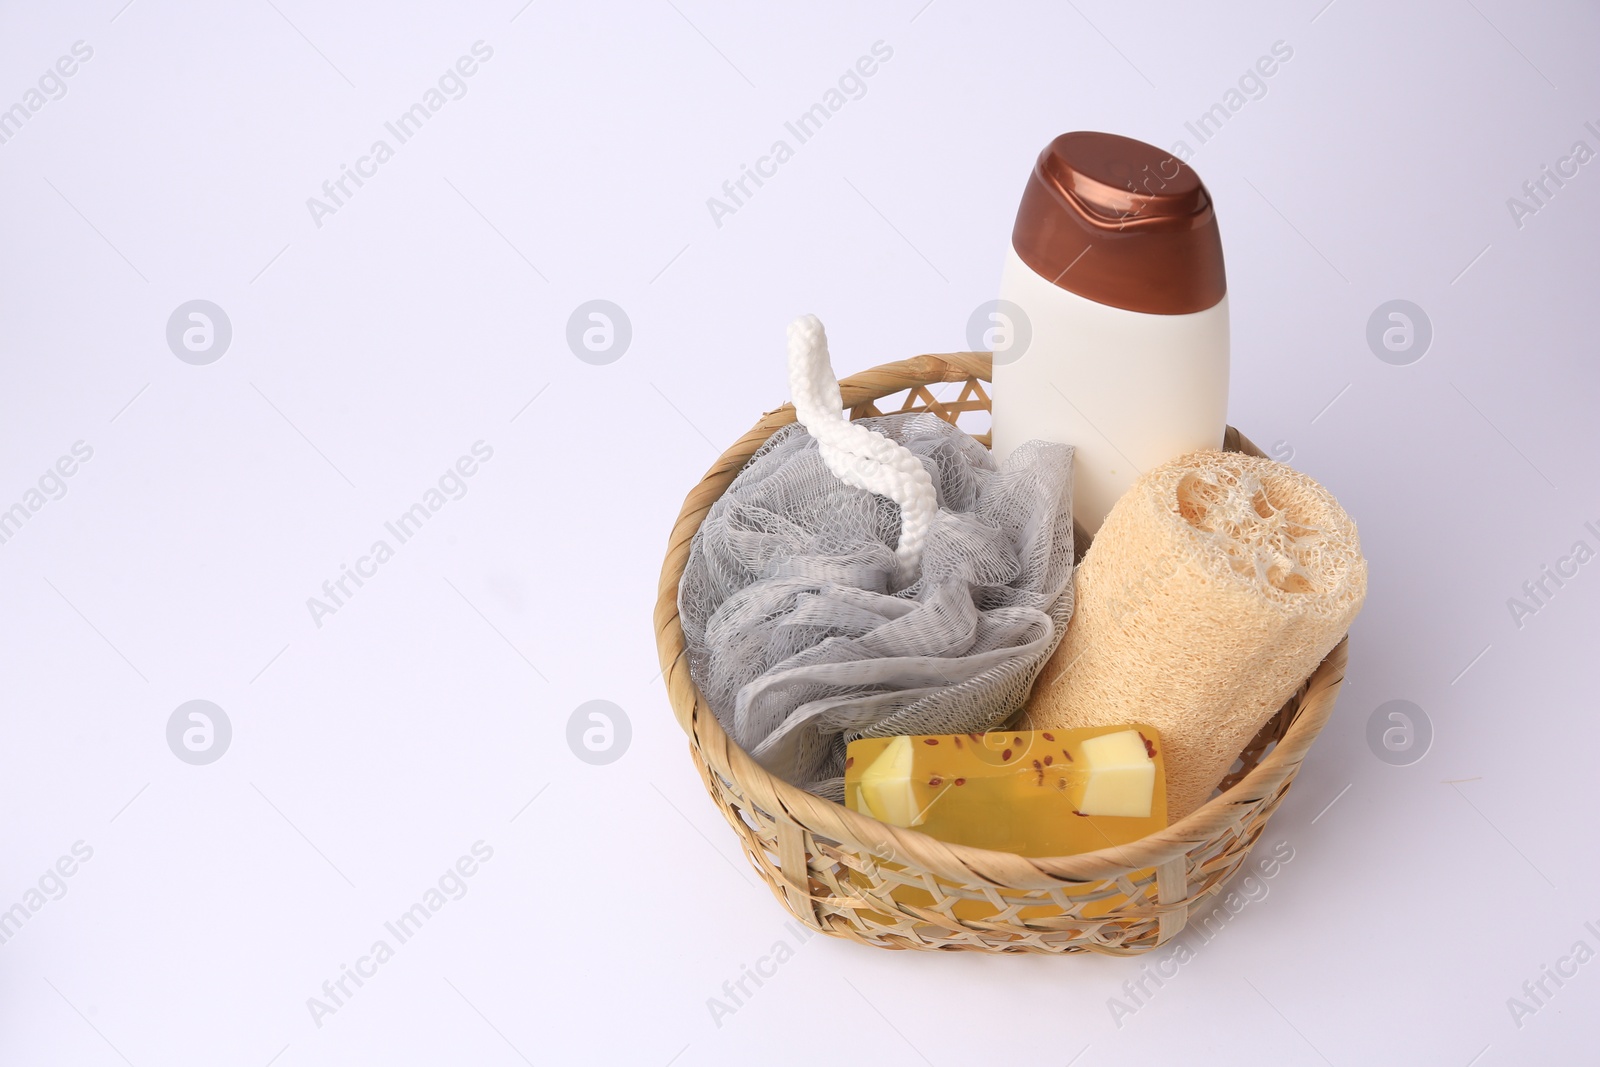 Photo of Wicker basket with shower puff, loofah sponge and cosmetic products on white background